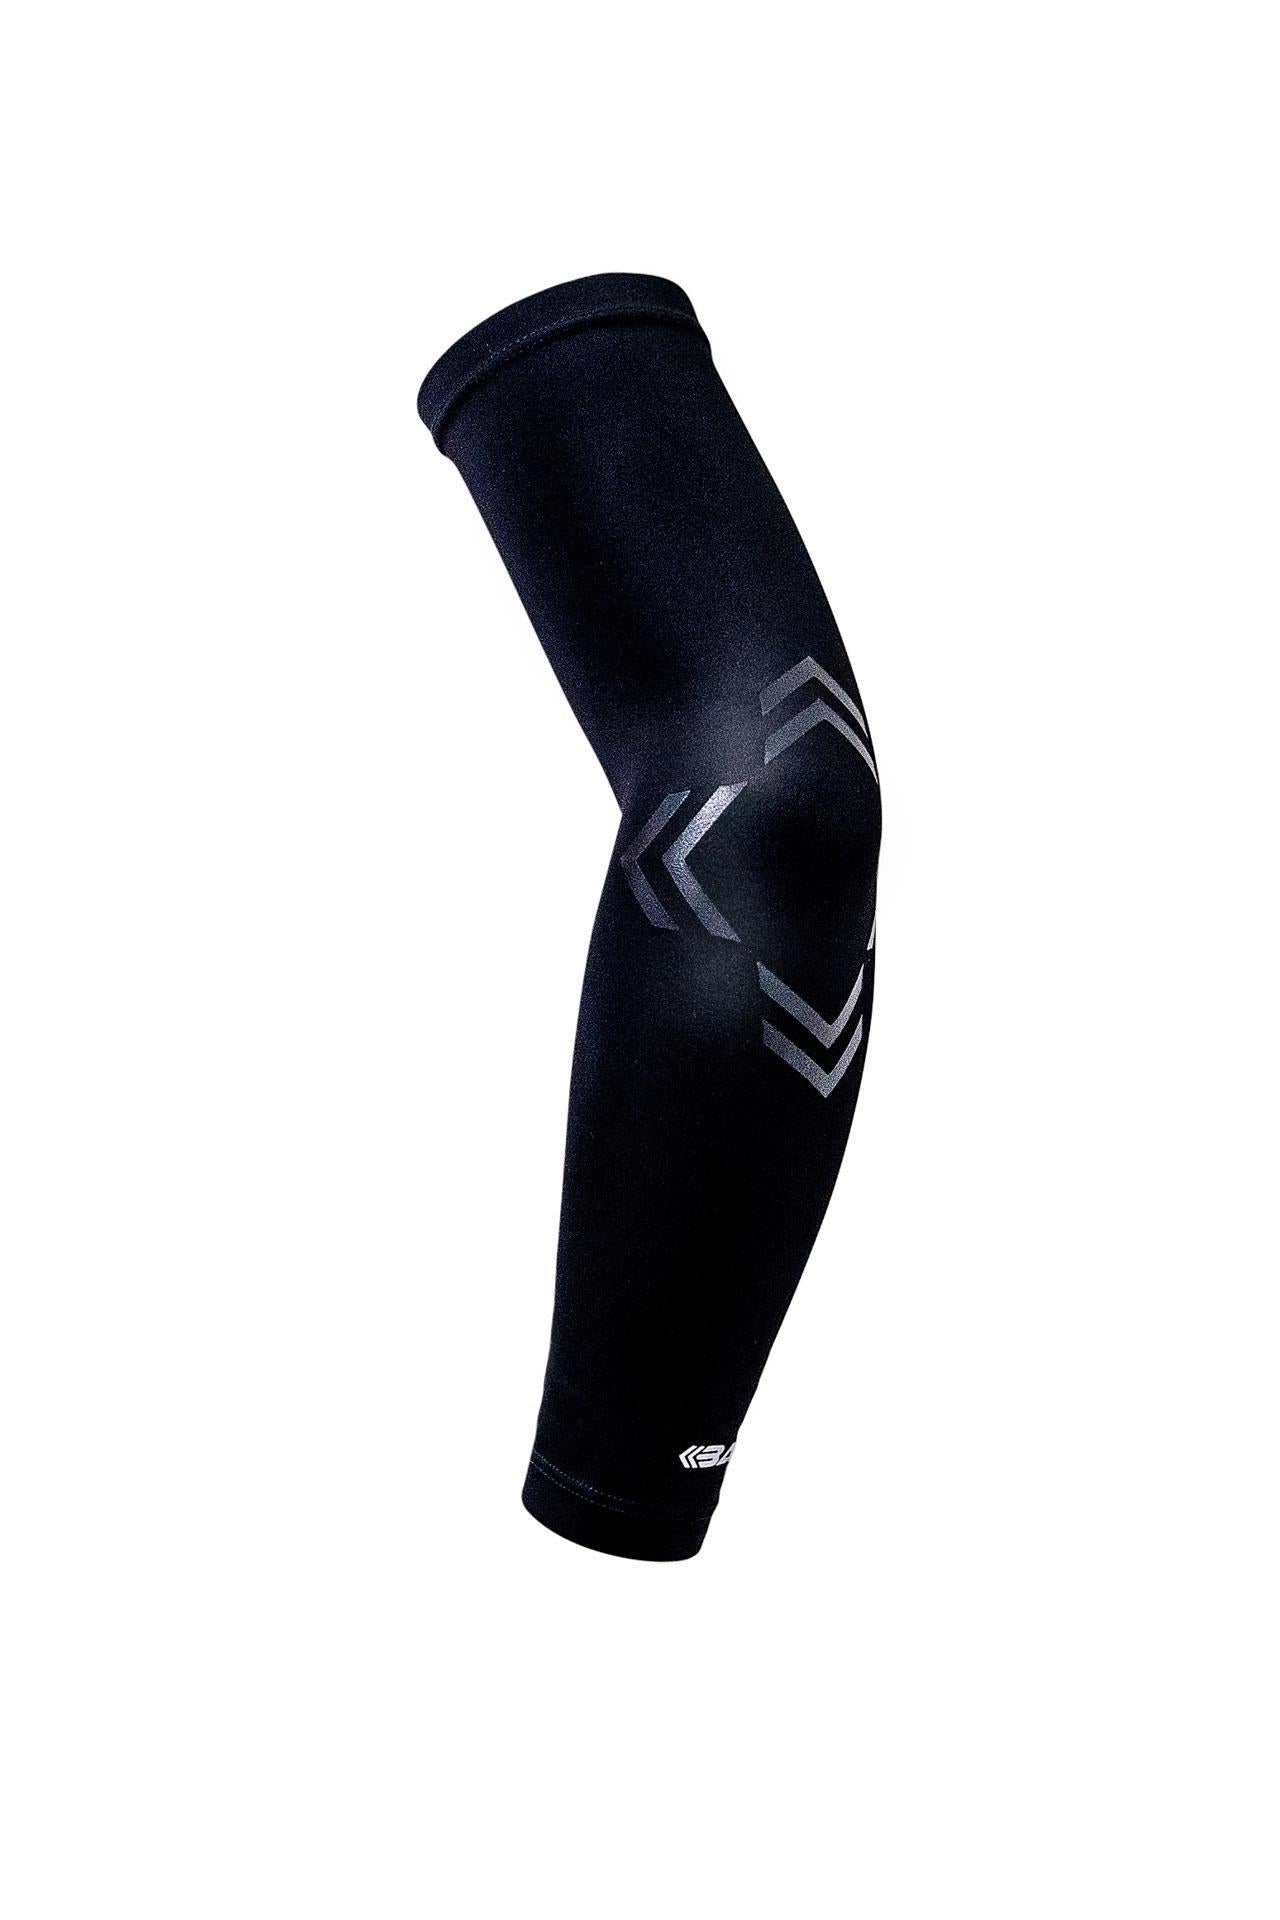 BASE Compression Arm Guard (Pair) - Black - Adelaide 36ers